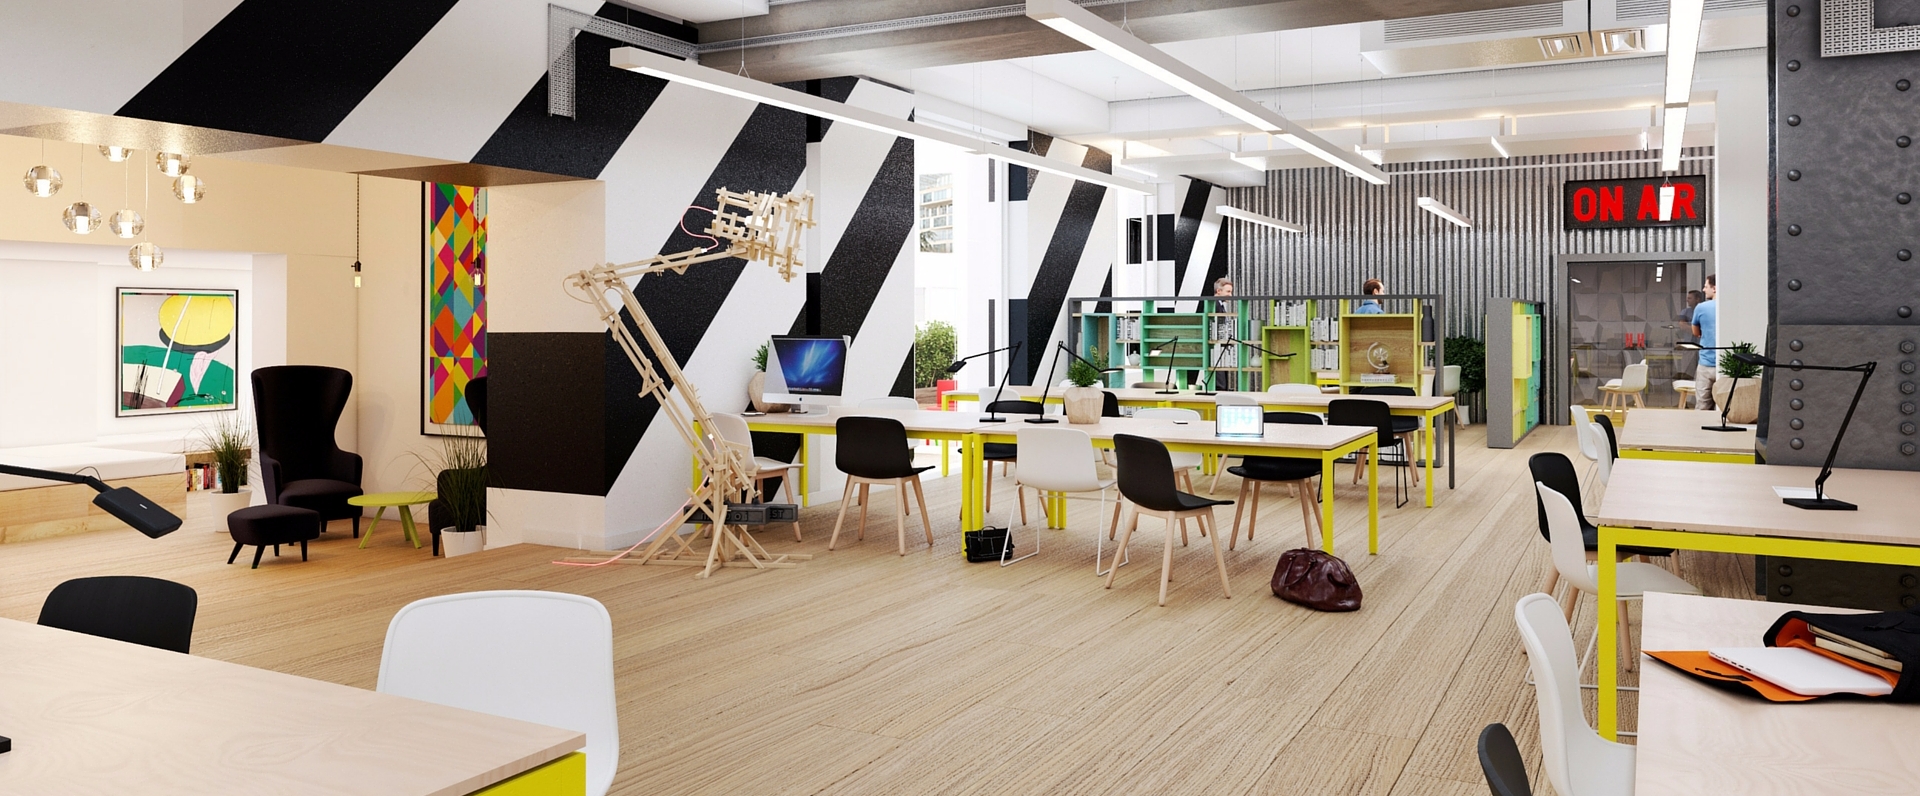 Top 77 London Coworking Spaces for Your Startup | InvoiceBerry Blog